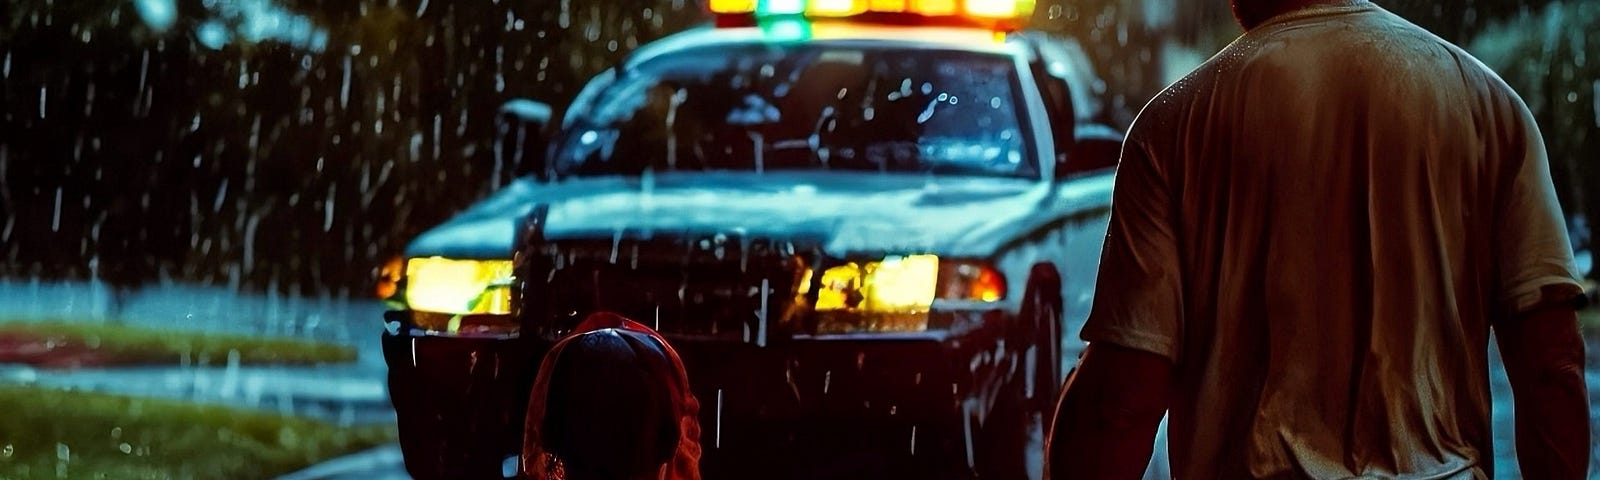 A man and a small girl, drenched in the rain, pause their playful dance on a wet street to face the flashing lights of a police car. A downpour blurs the scene, reflecting the shimmering street lights of a Miami suburb.